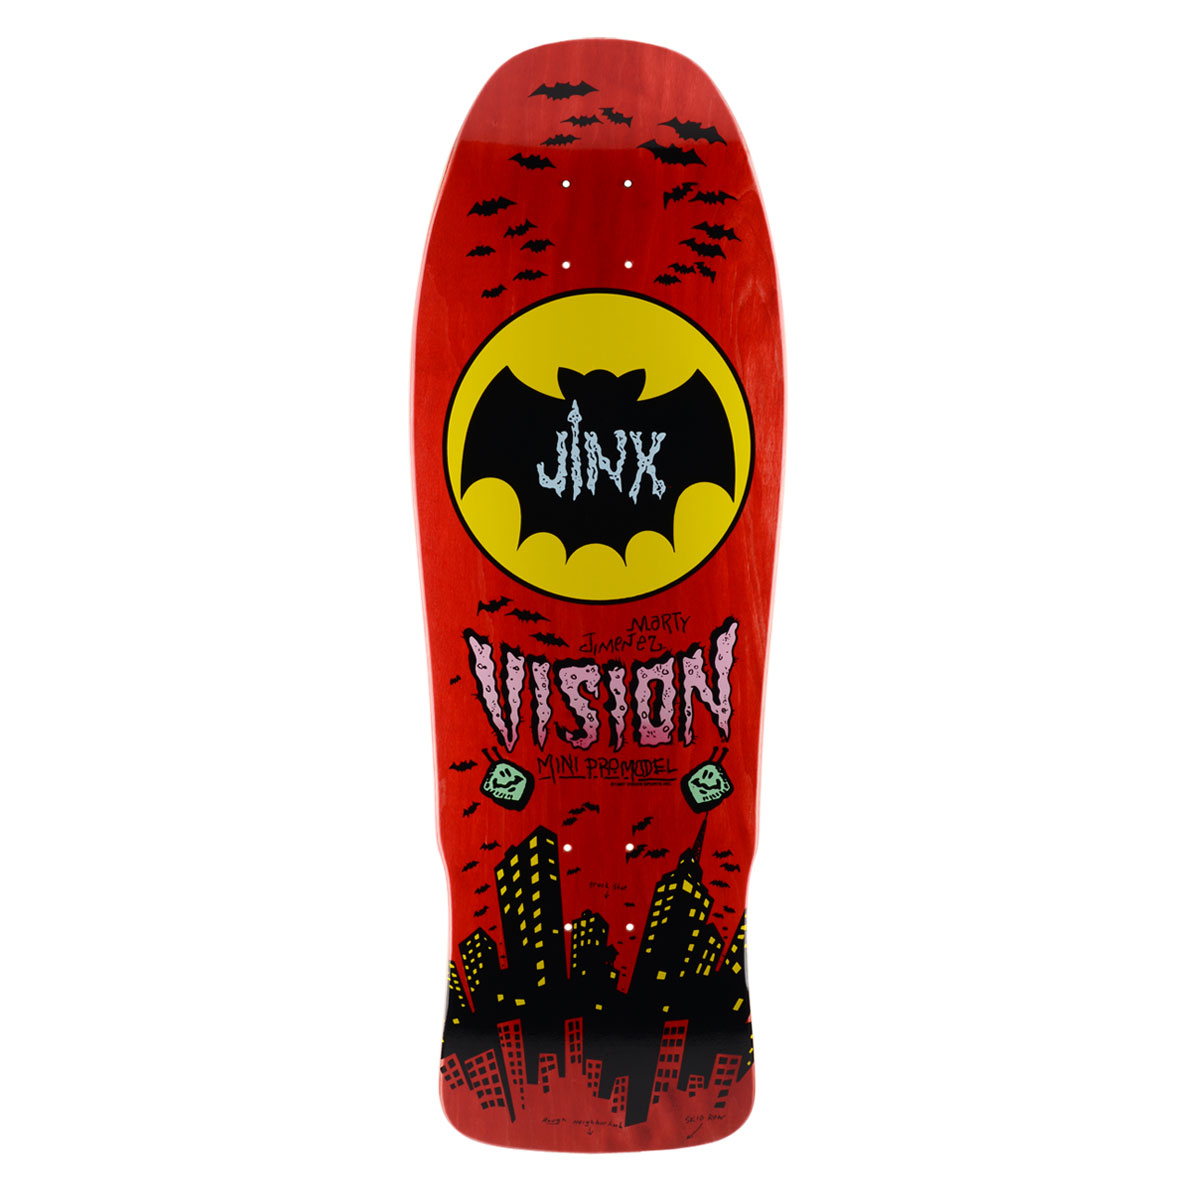 GREEN/RED RARE Details about   VISION GATOR SKATEBOARD DECK NEW OLD SCHOOL REISSUE 